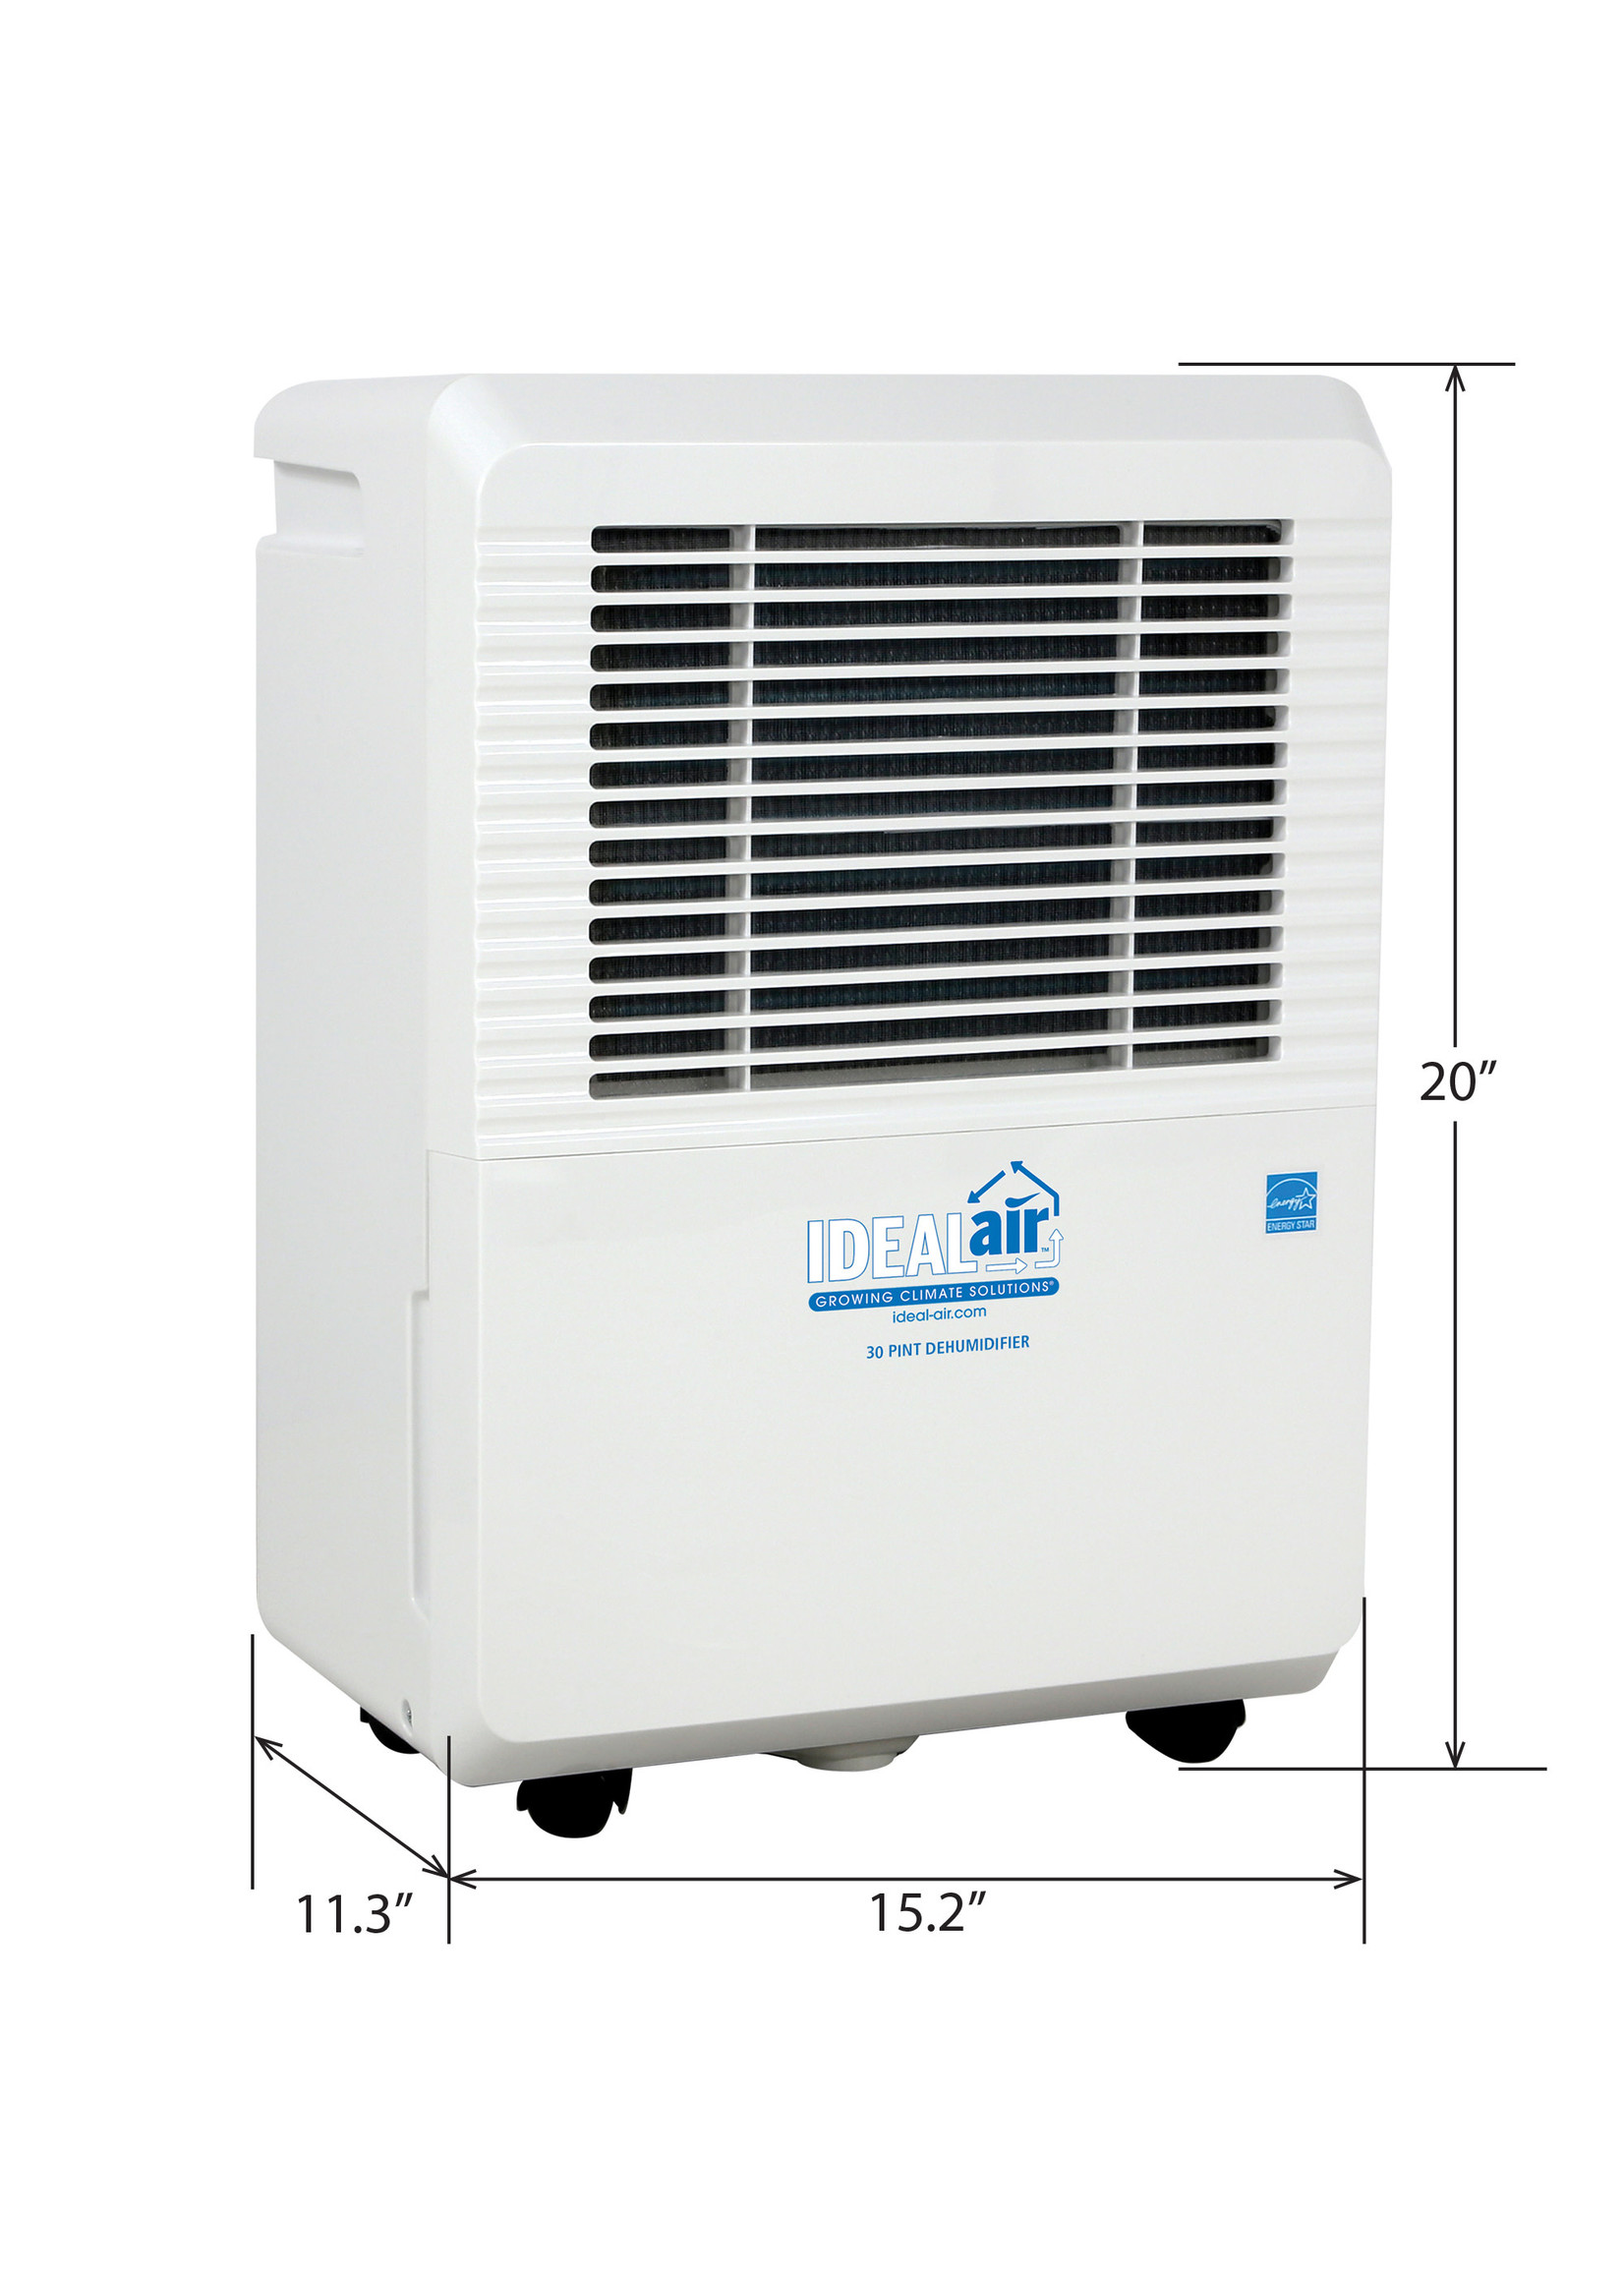 Ideal-Air Dehumidifier 50 PINT Up to 80 Pints Per Day